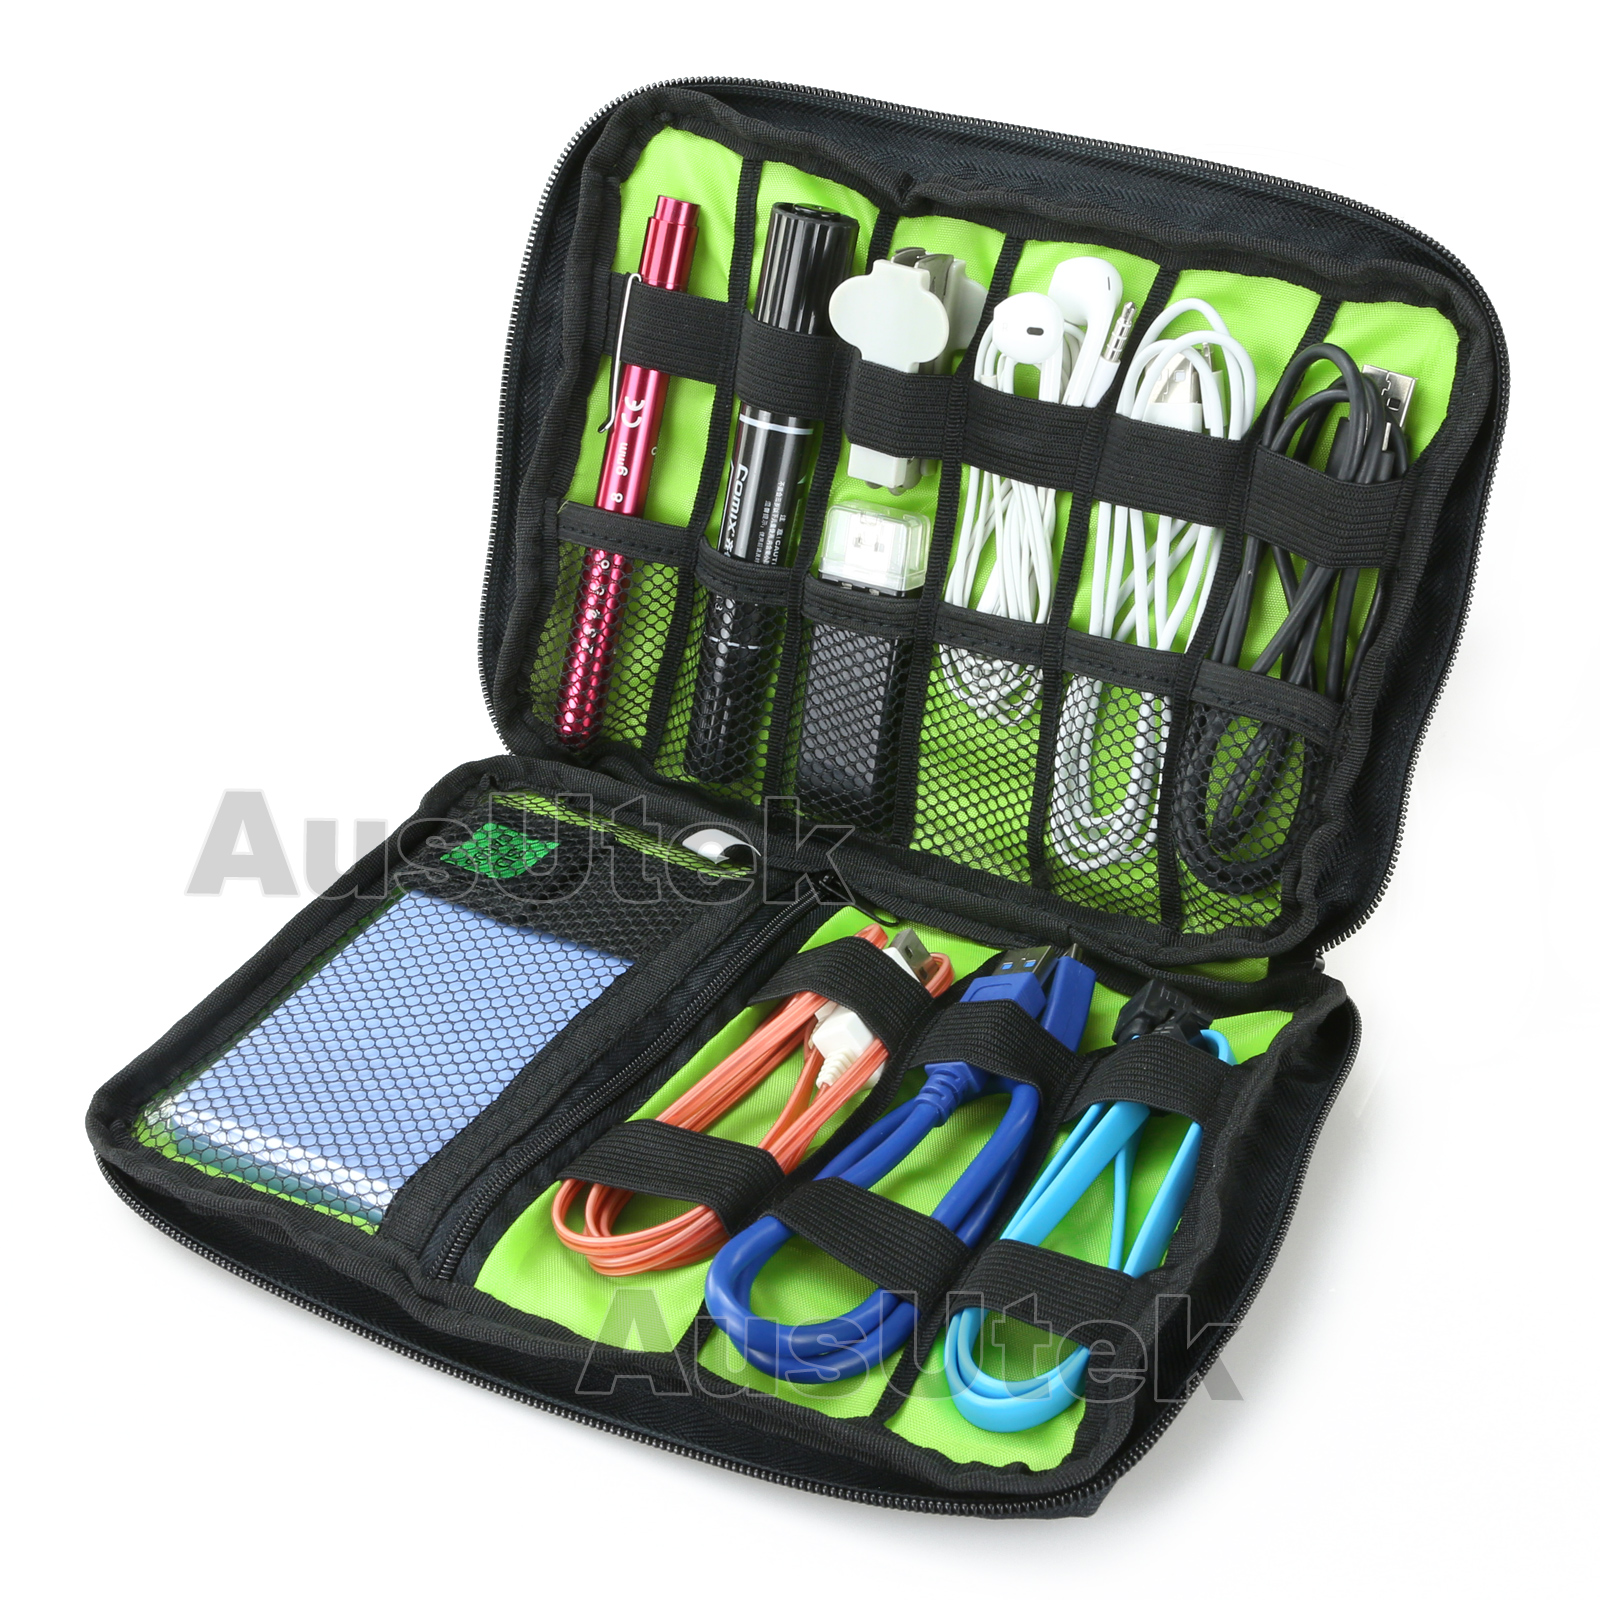 Electronic Accessories Storage USB Cable Organizer Bag Case Drive Travel Insert | eBay